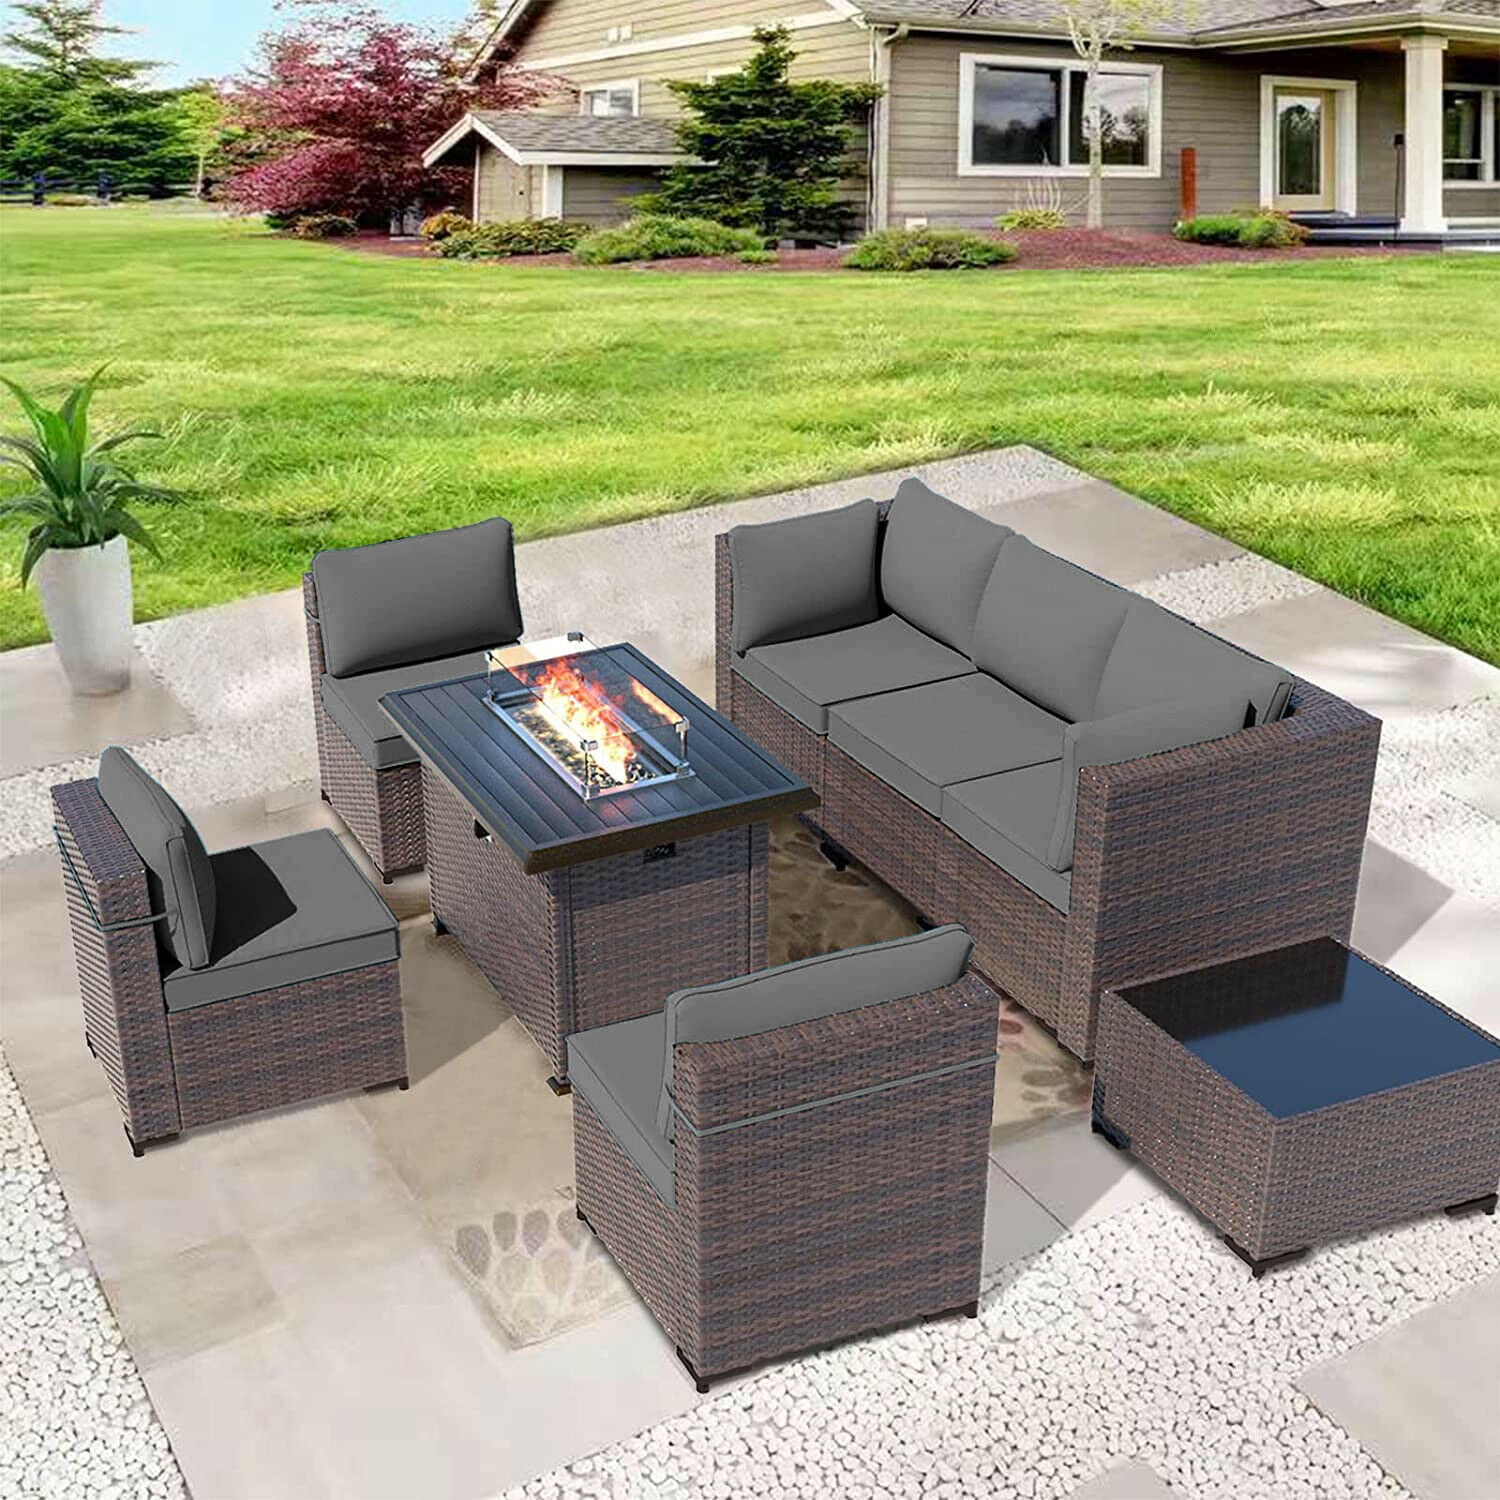 Dark Blue ALAULM 8 Pieces Outdoor Patio Furniture Set with Propane Fire Pit Table Outdoor Sectional Sofa Sets Patio Furniture 43 Gas Fire Pit Brown PE Rattan Patio Conversation Set w/6 Cushions 